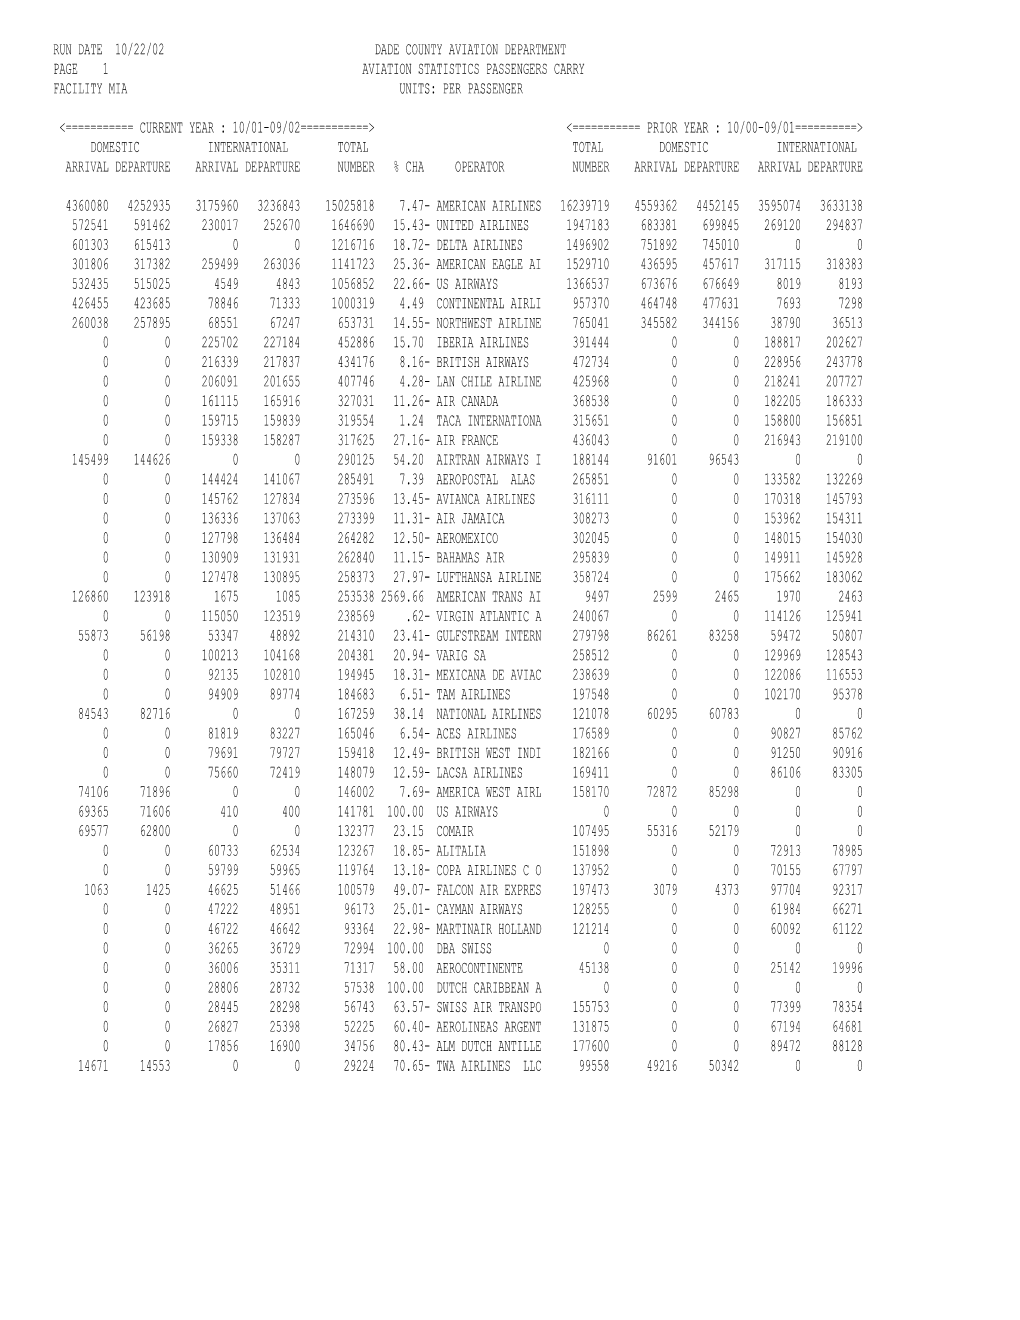 Run Date 10/22/02 Dade County Aviation Department Page 1 Aviation Statistics Passengers Carry Facility Mia Units: Per Passenger